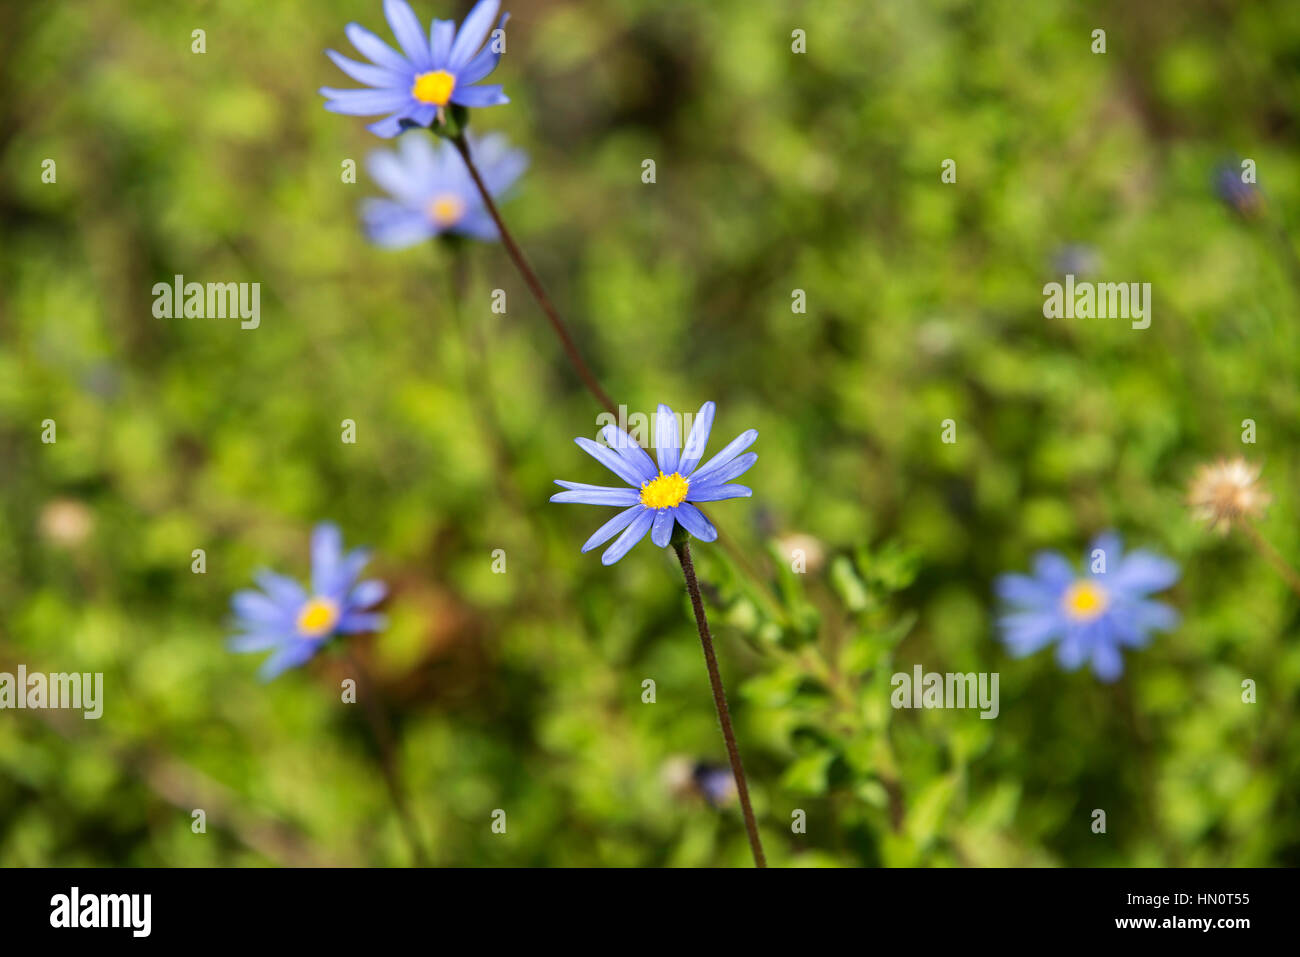 A close up of blue daisies in a field Stock Photo